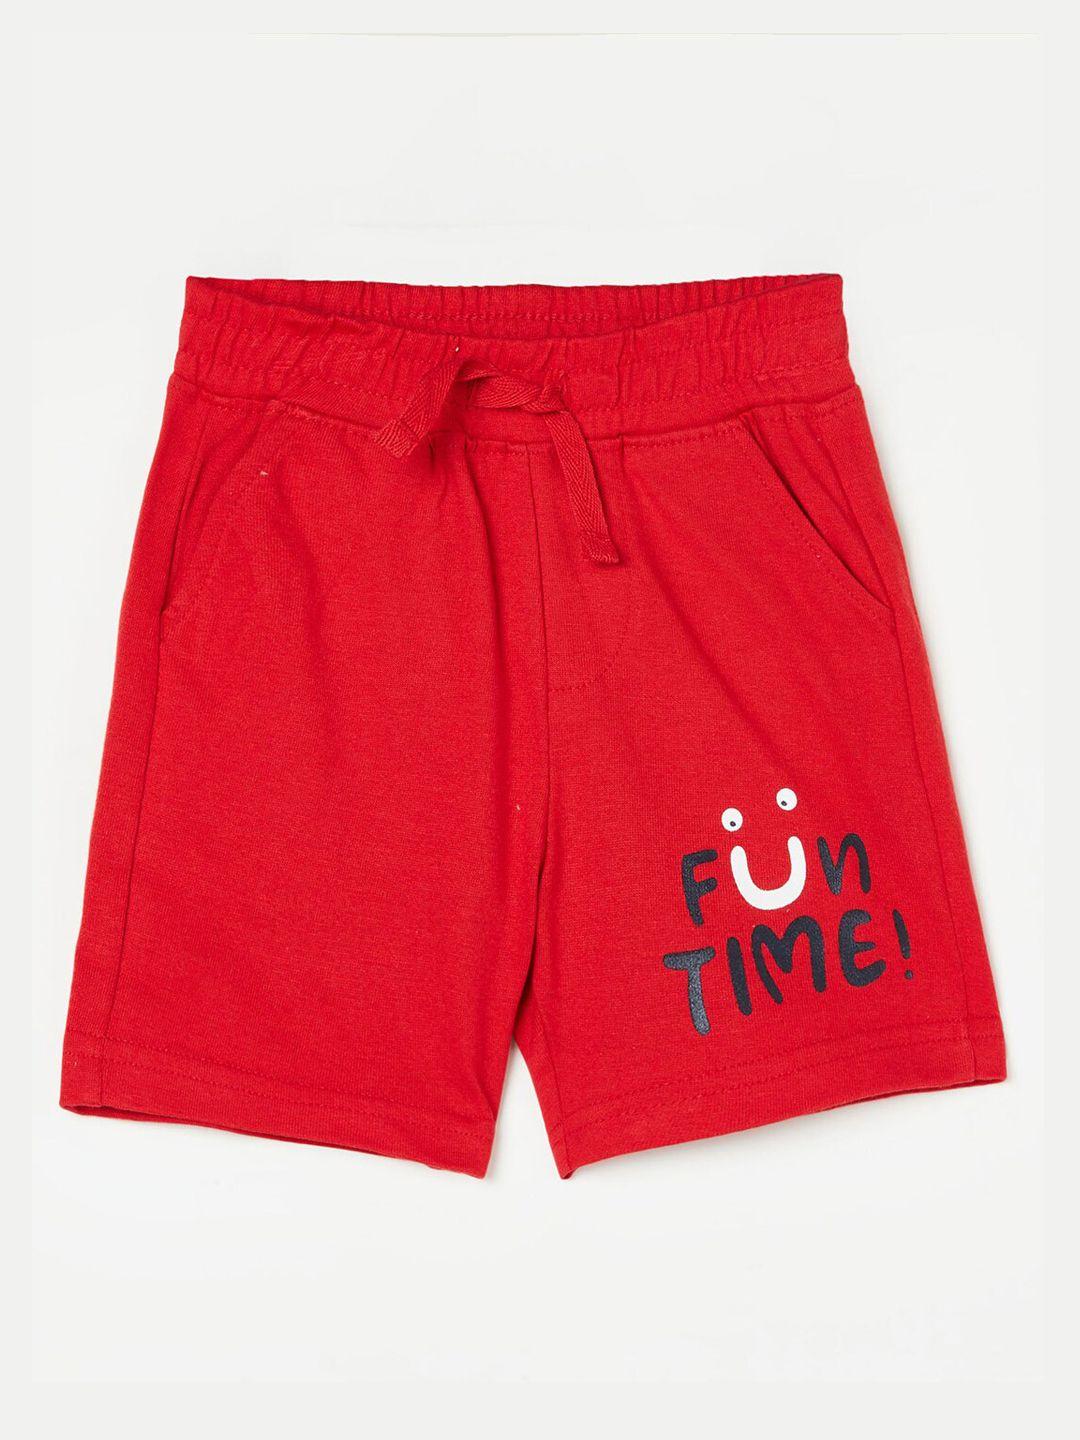 Juniors by Lifestyle Infant Boys Mid-Rise Typography Printed Shorts